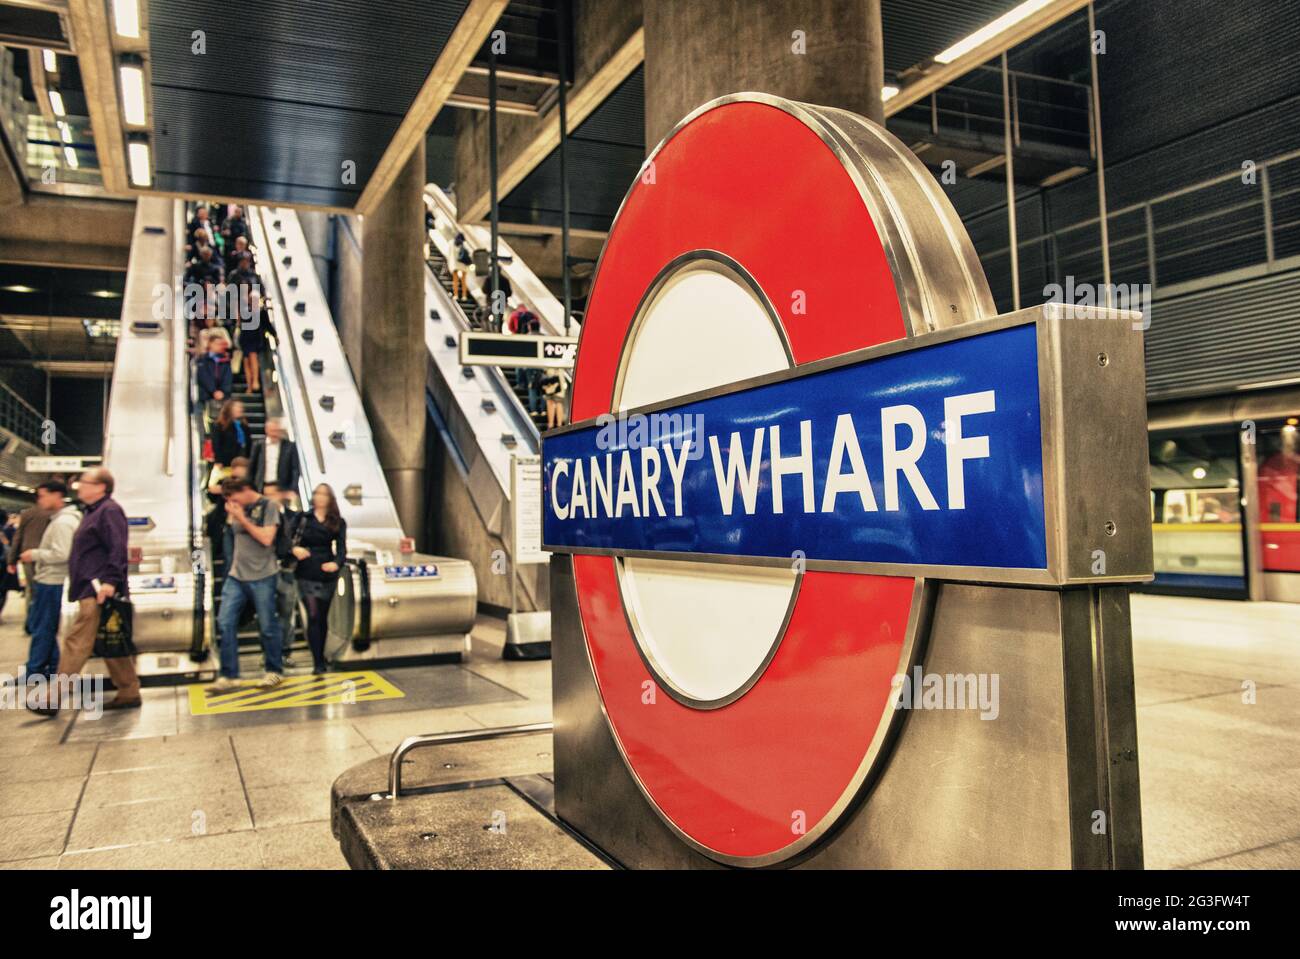 LONDON - SEP 27: The London Underground sign outside the Canary Wharf Station shines in London's Financial District on September Stock Photo